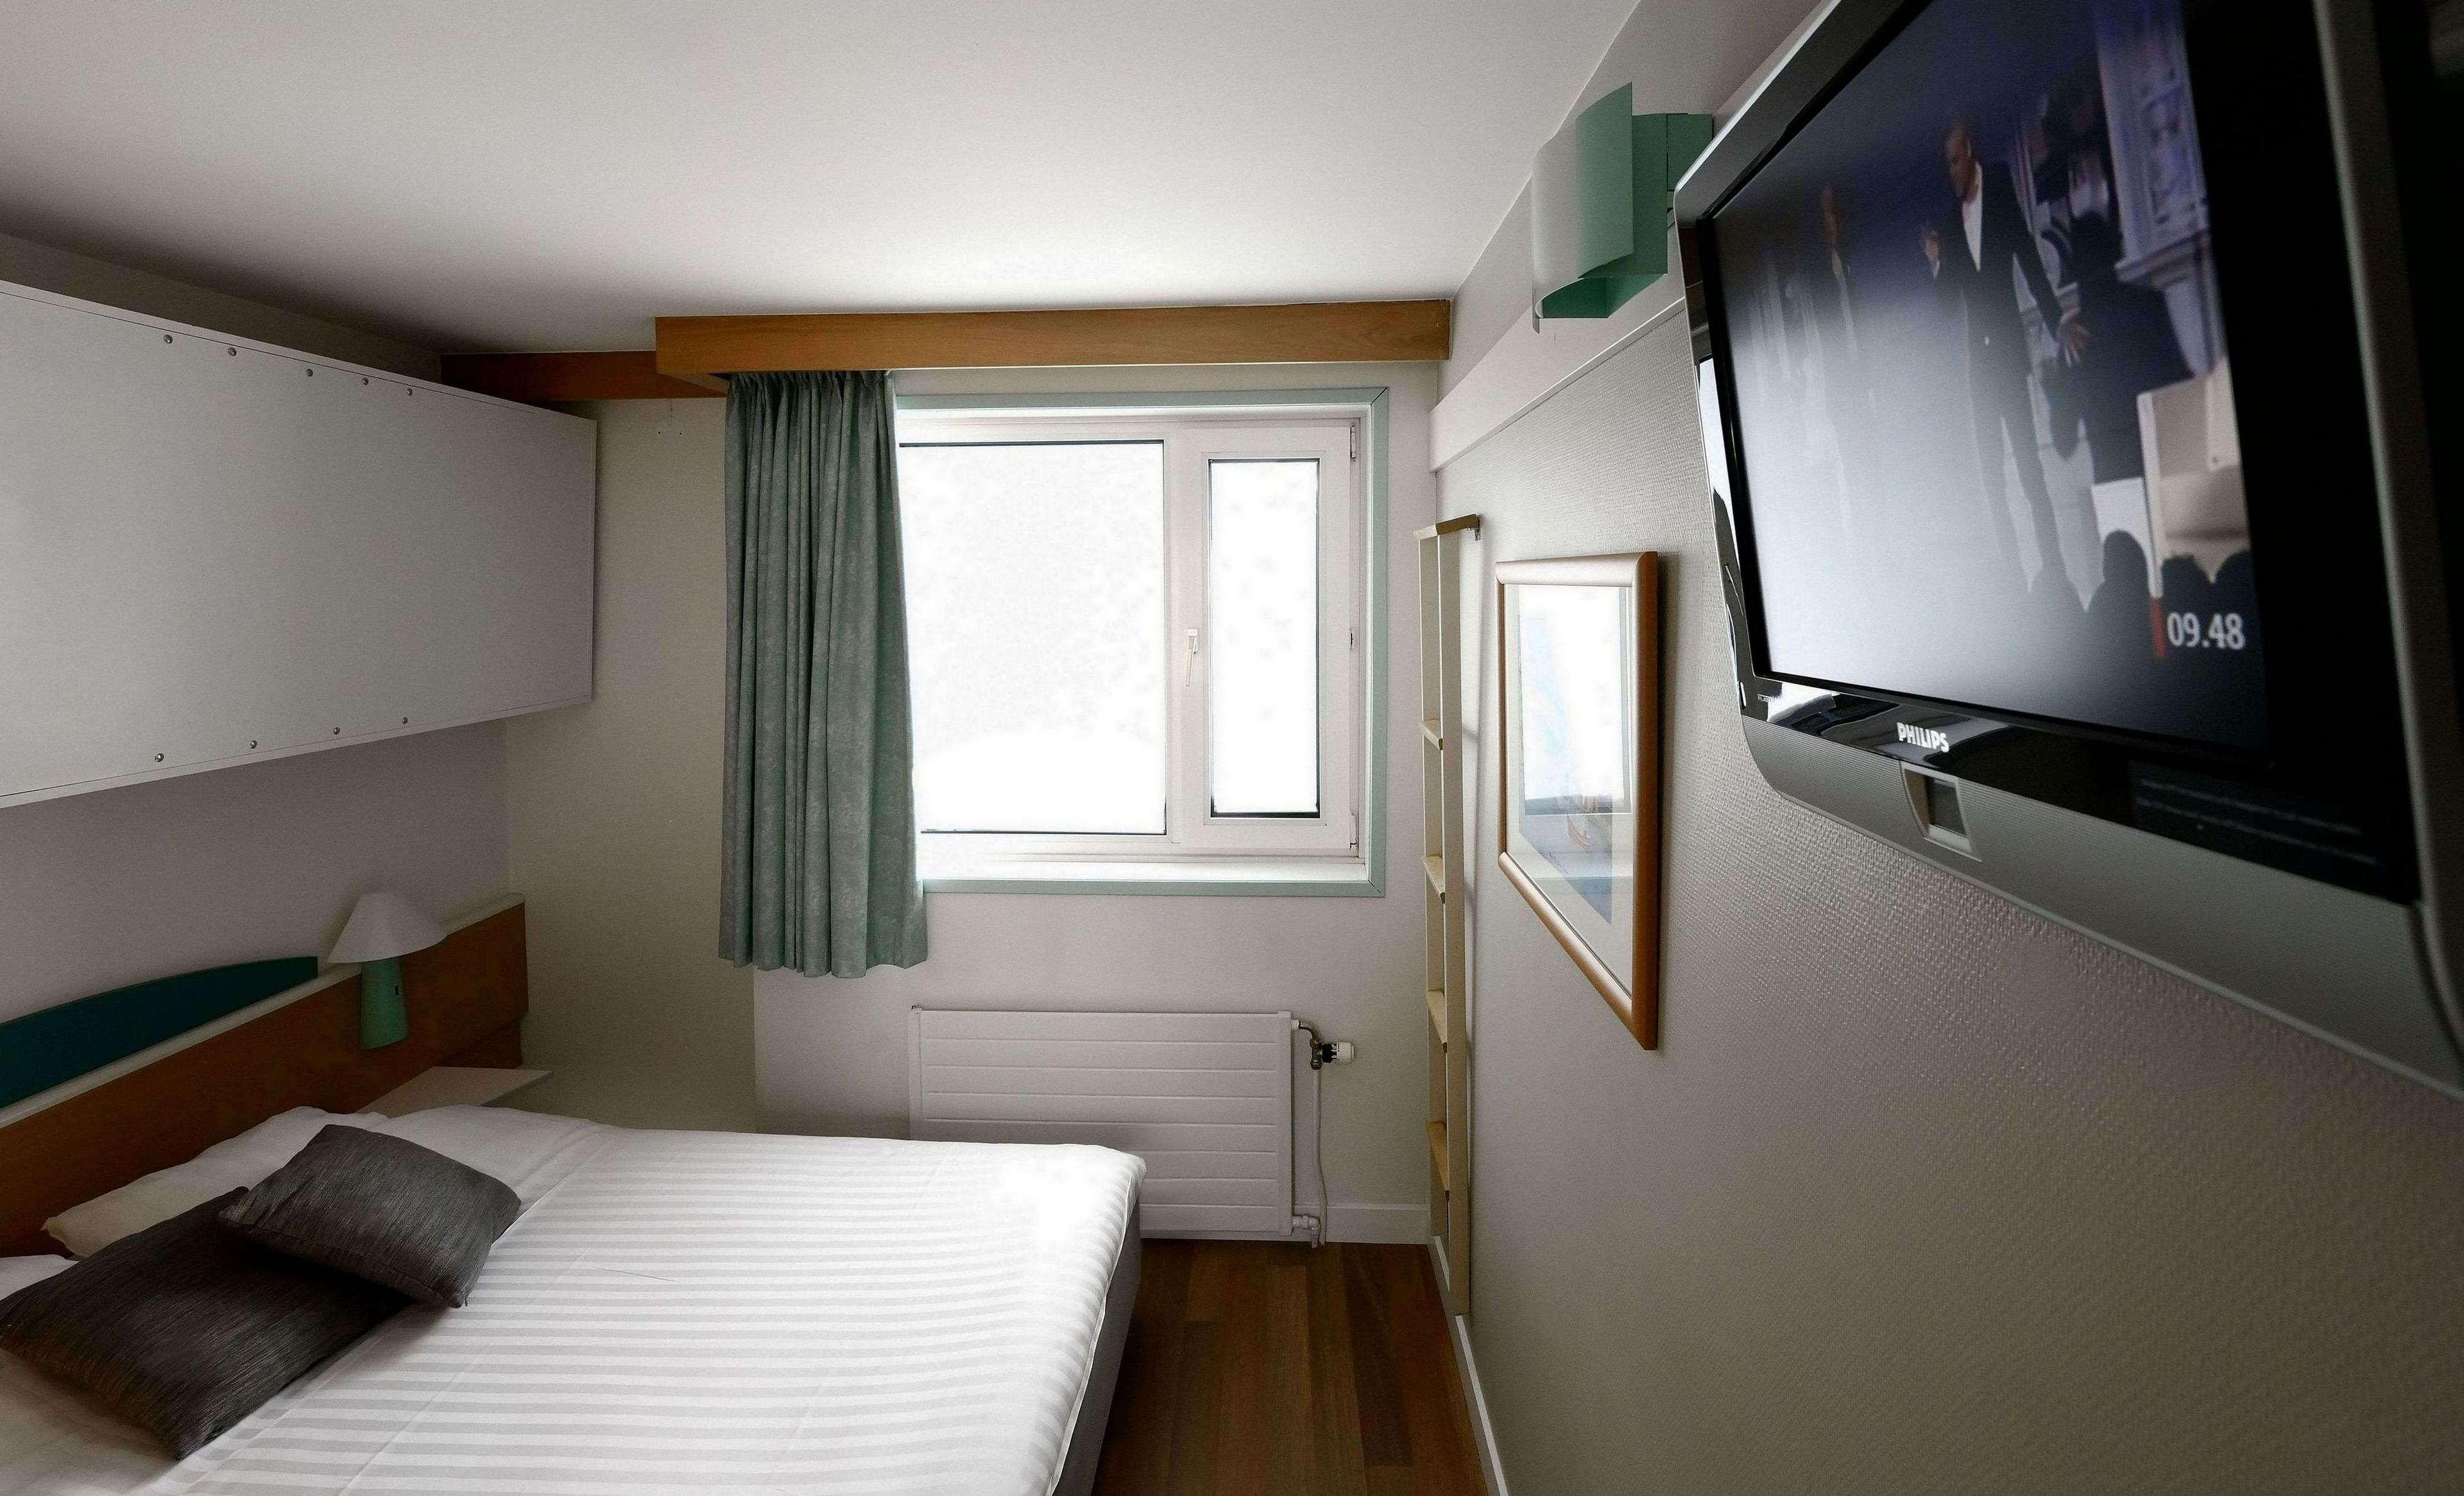 Free WiFi, flatscreen TV, a work area with desk. Beds are 140cm. Bathroom with shower.